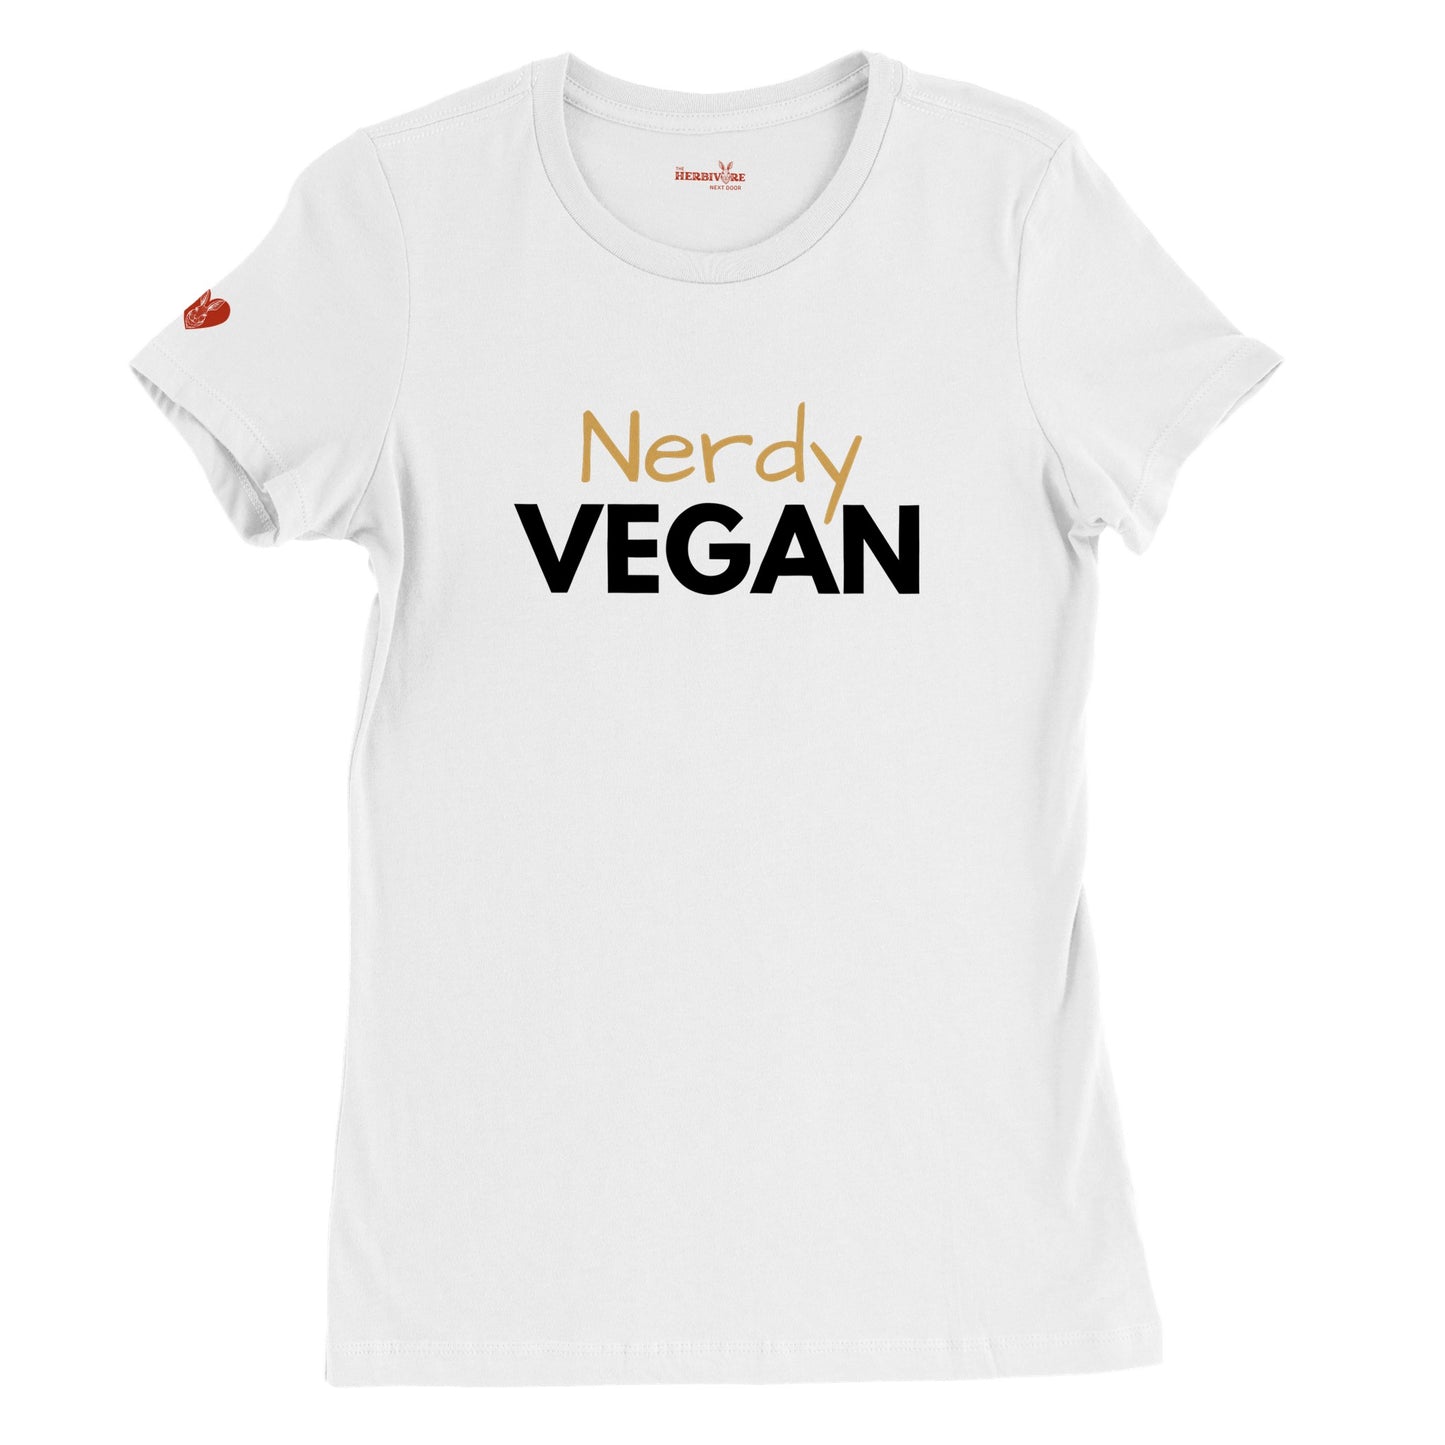 Nerdy Vegan - Women's Style (Women's run small - get one size up from normal unisex)